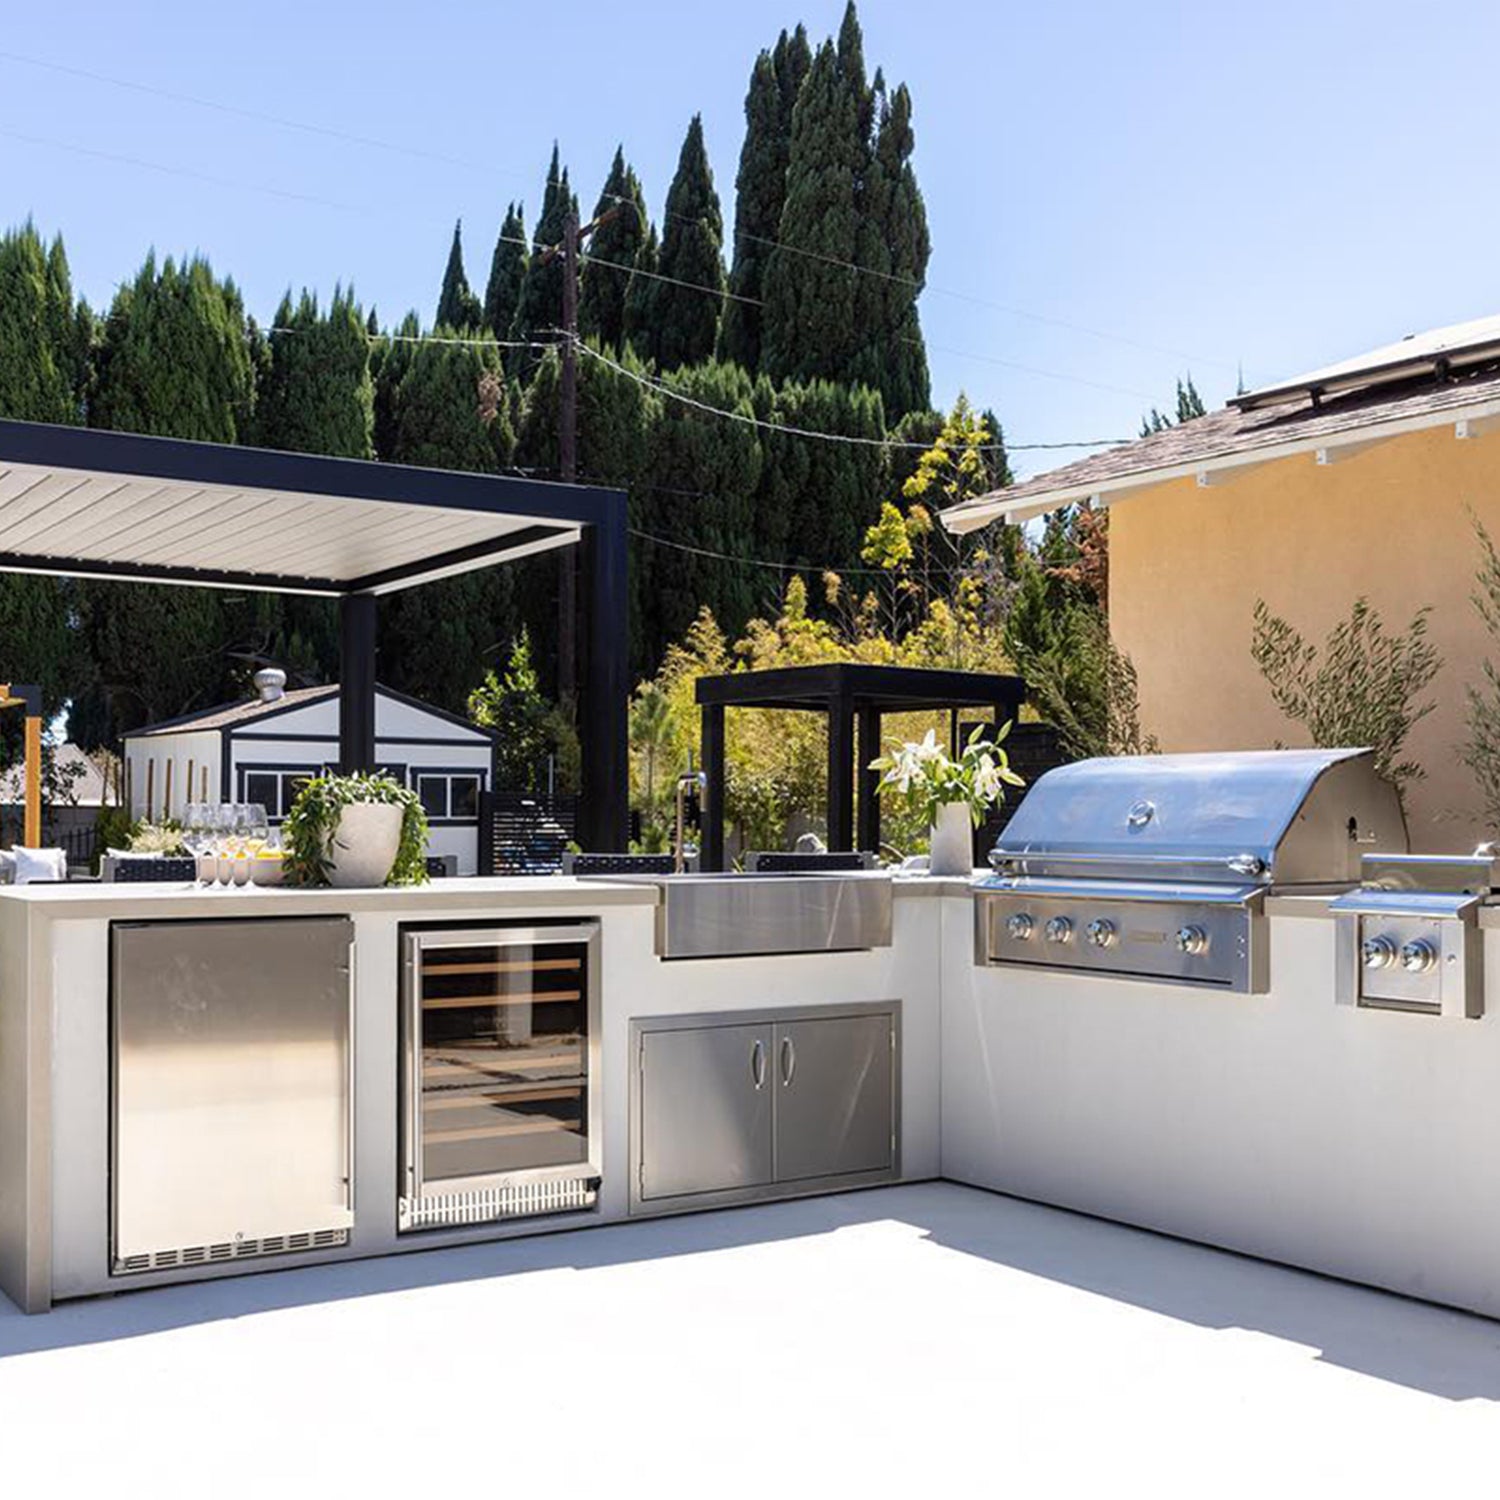 Planning your dream outdoor kitchen with top products from brands like Summerset